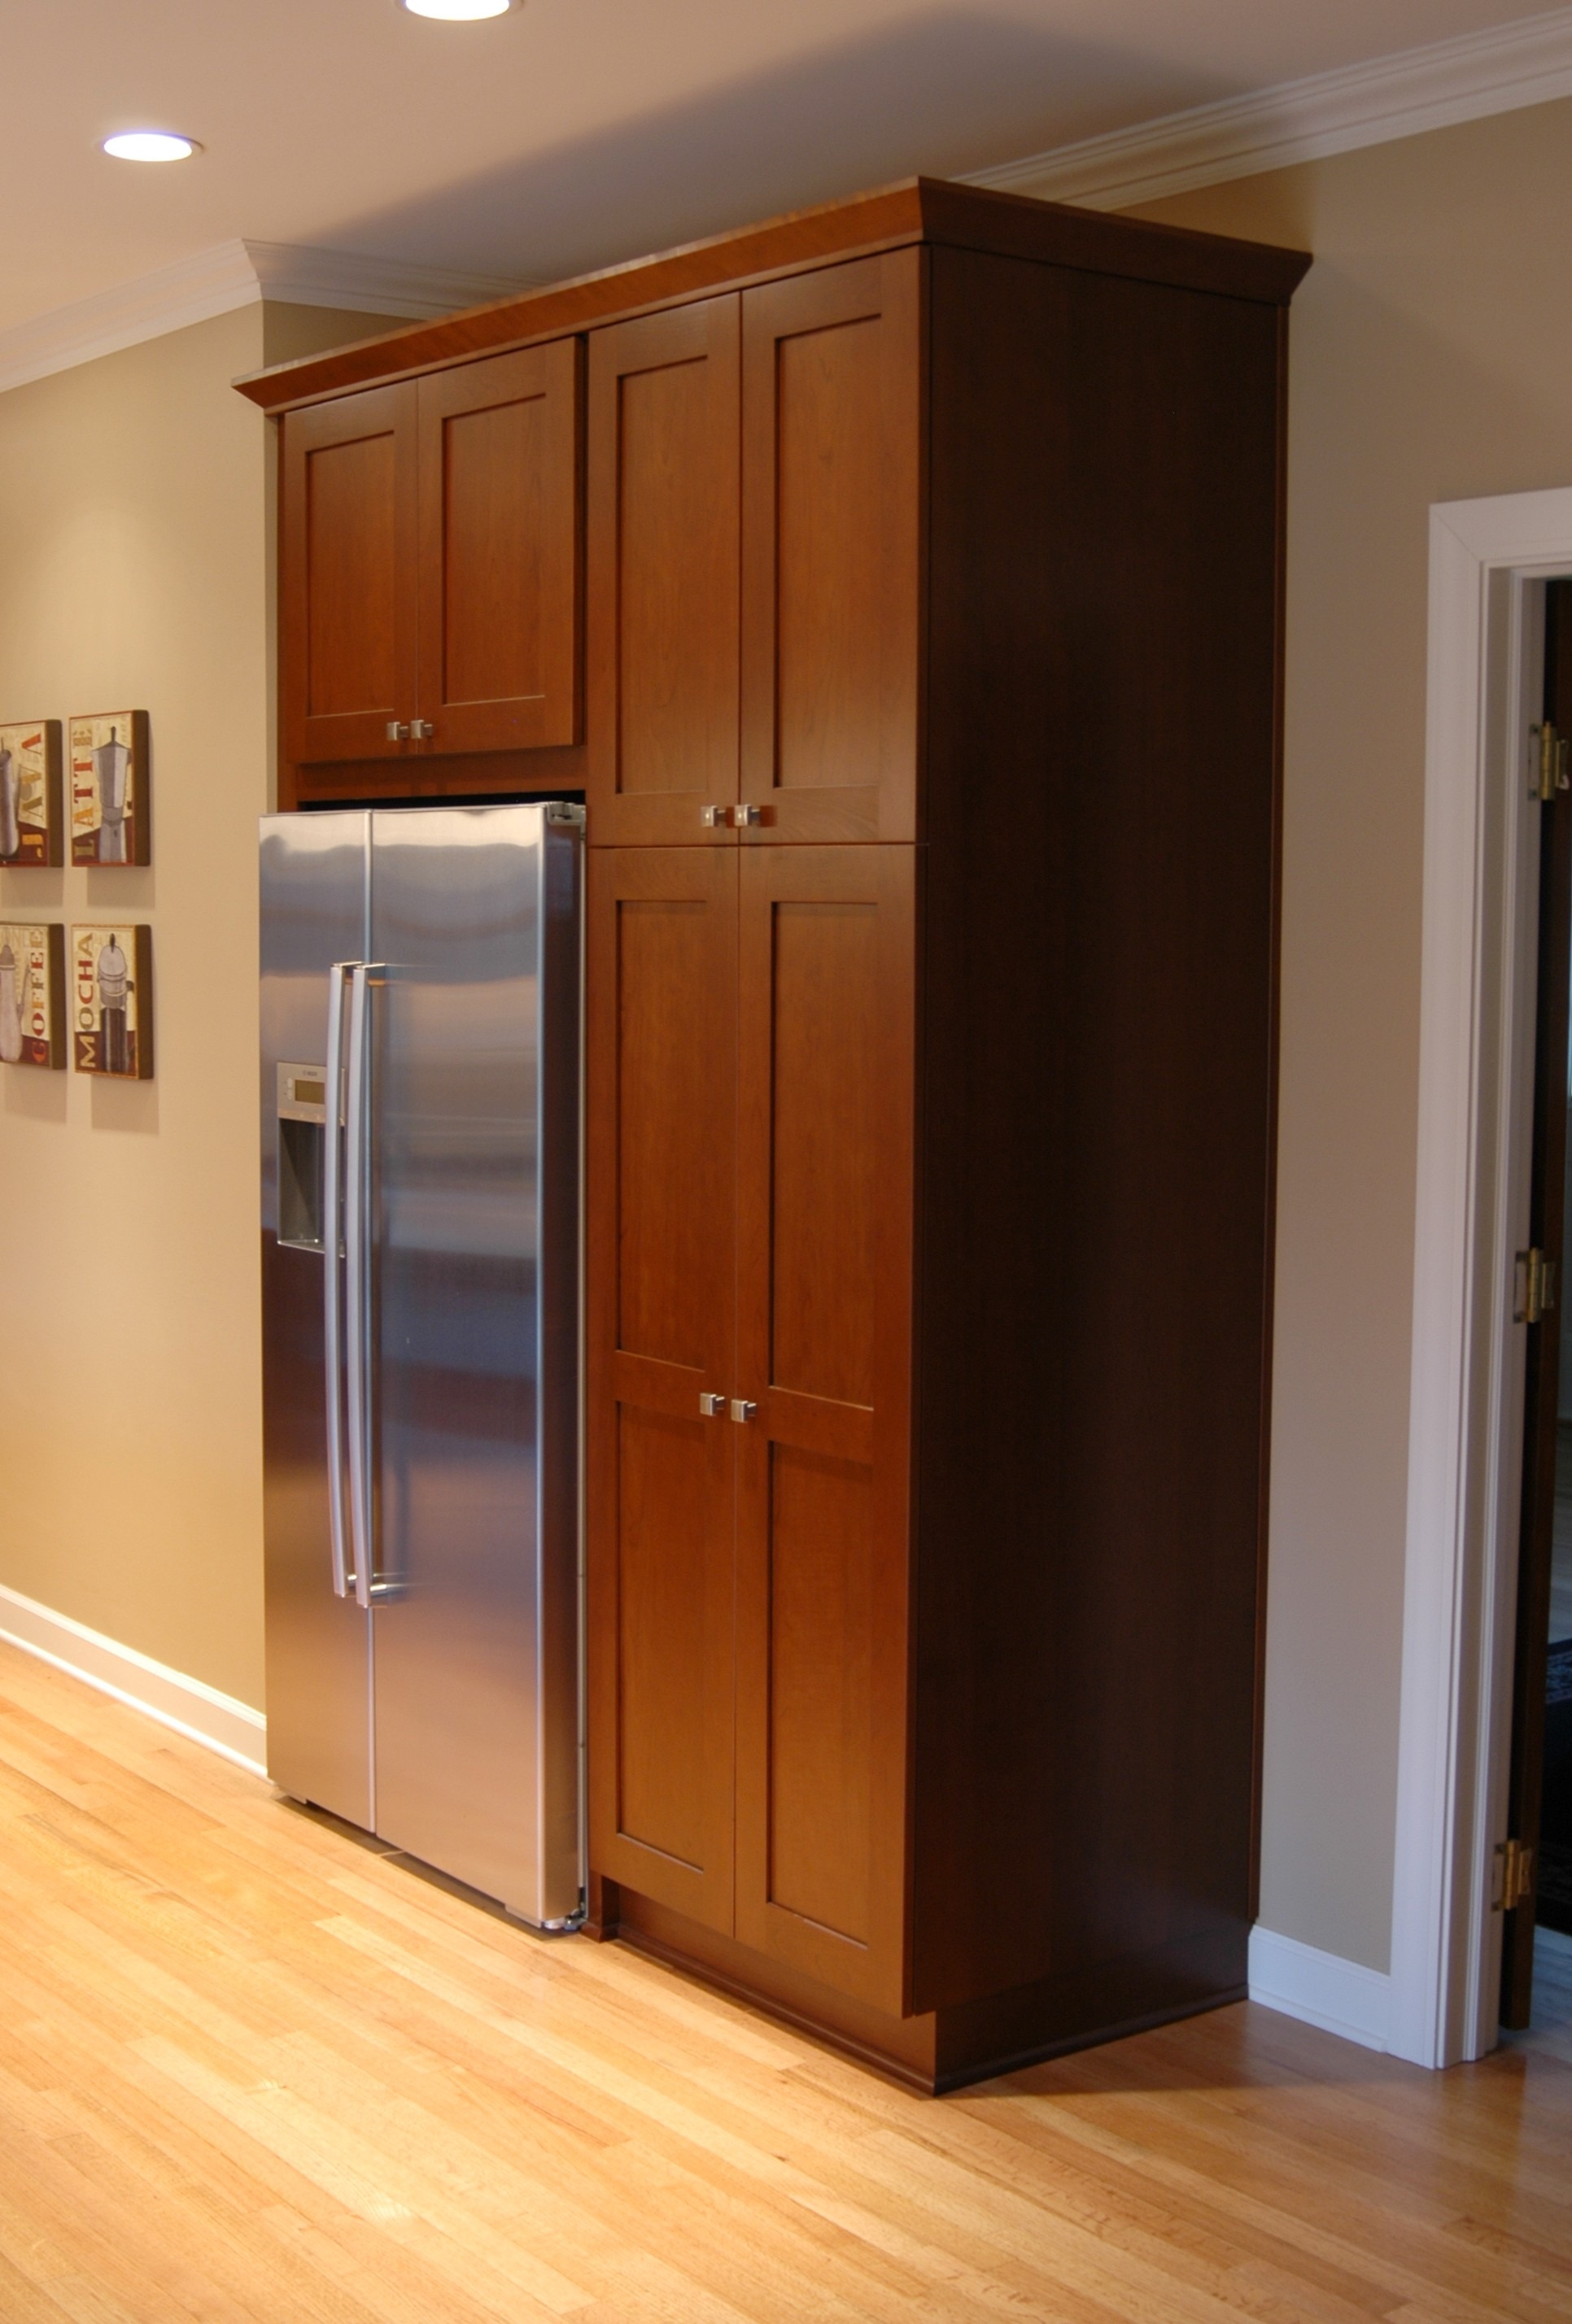 3 Cabinet pantry and counter depth refrigerator replaces desk and drywall pantry | Kitchen Master